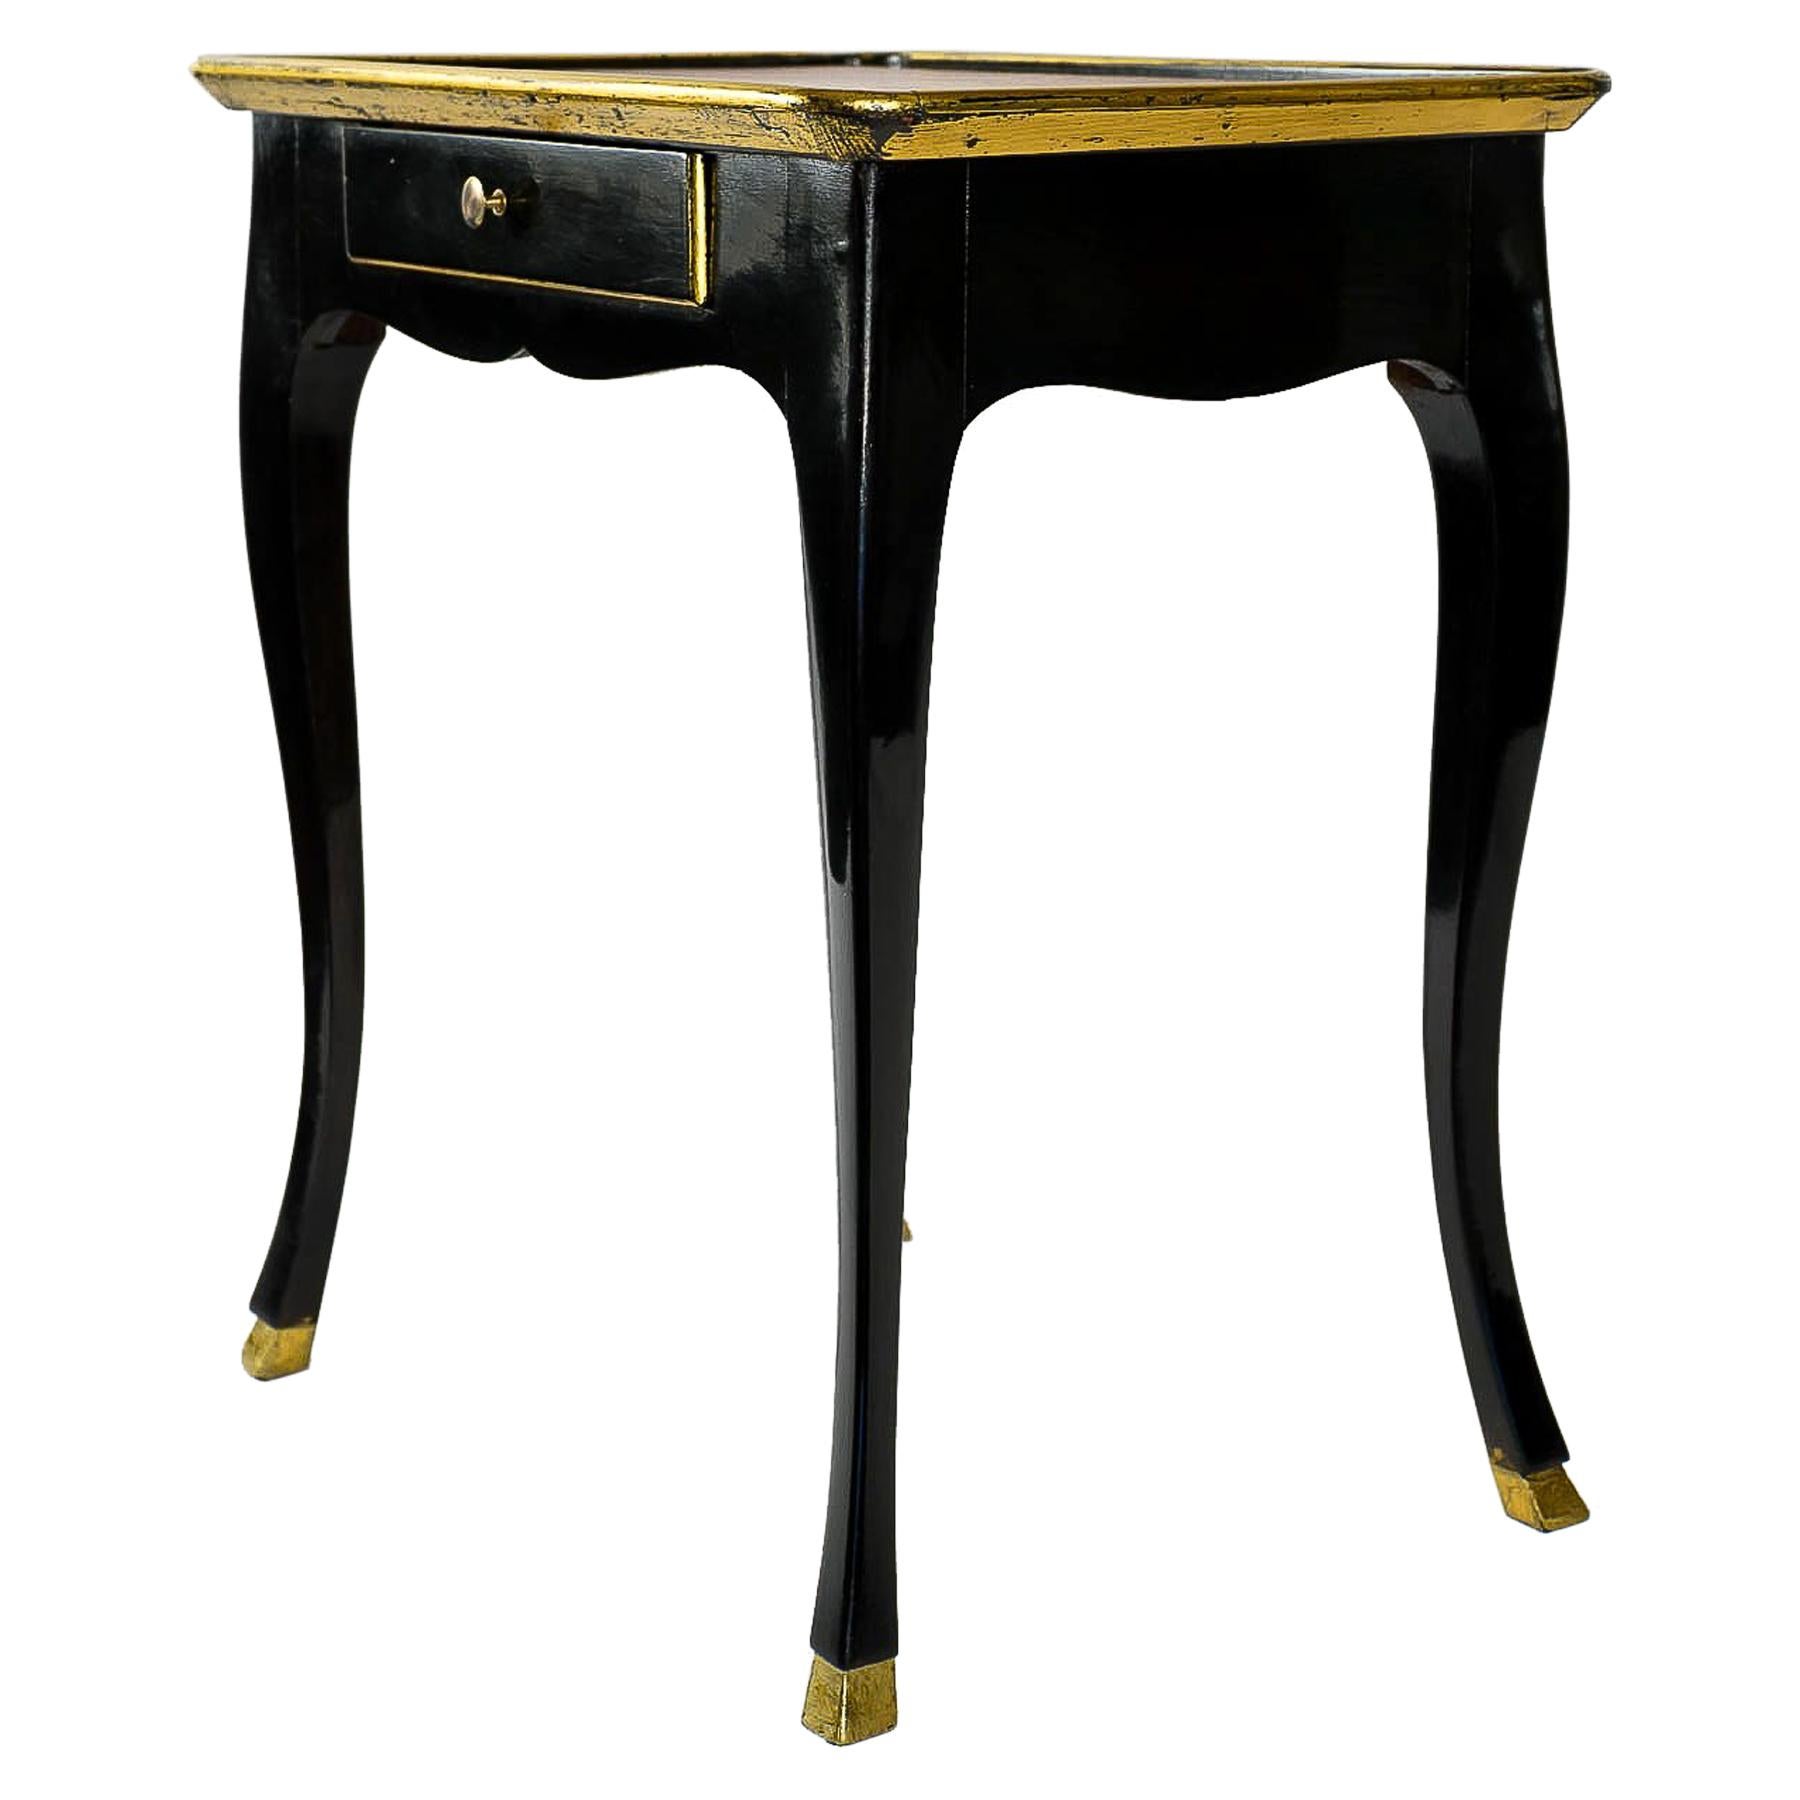 French Louis XV Period, Cabaret Table in Walnut Lacquered, circa 1740-1750